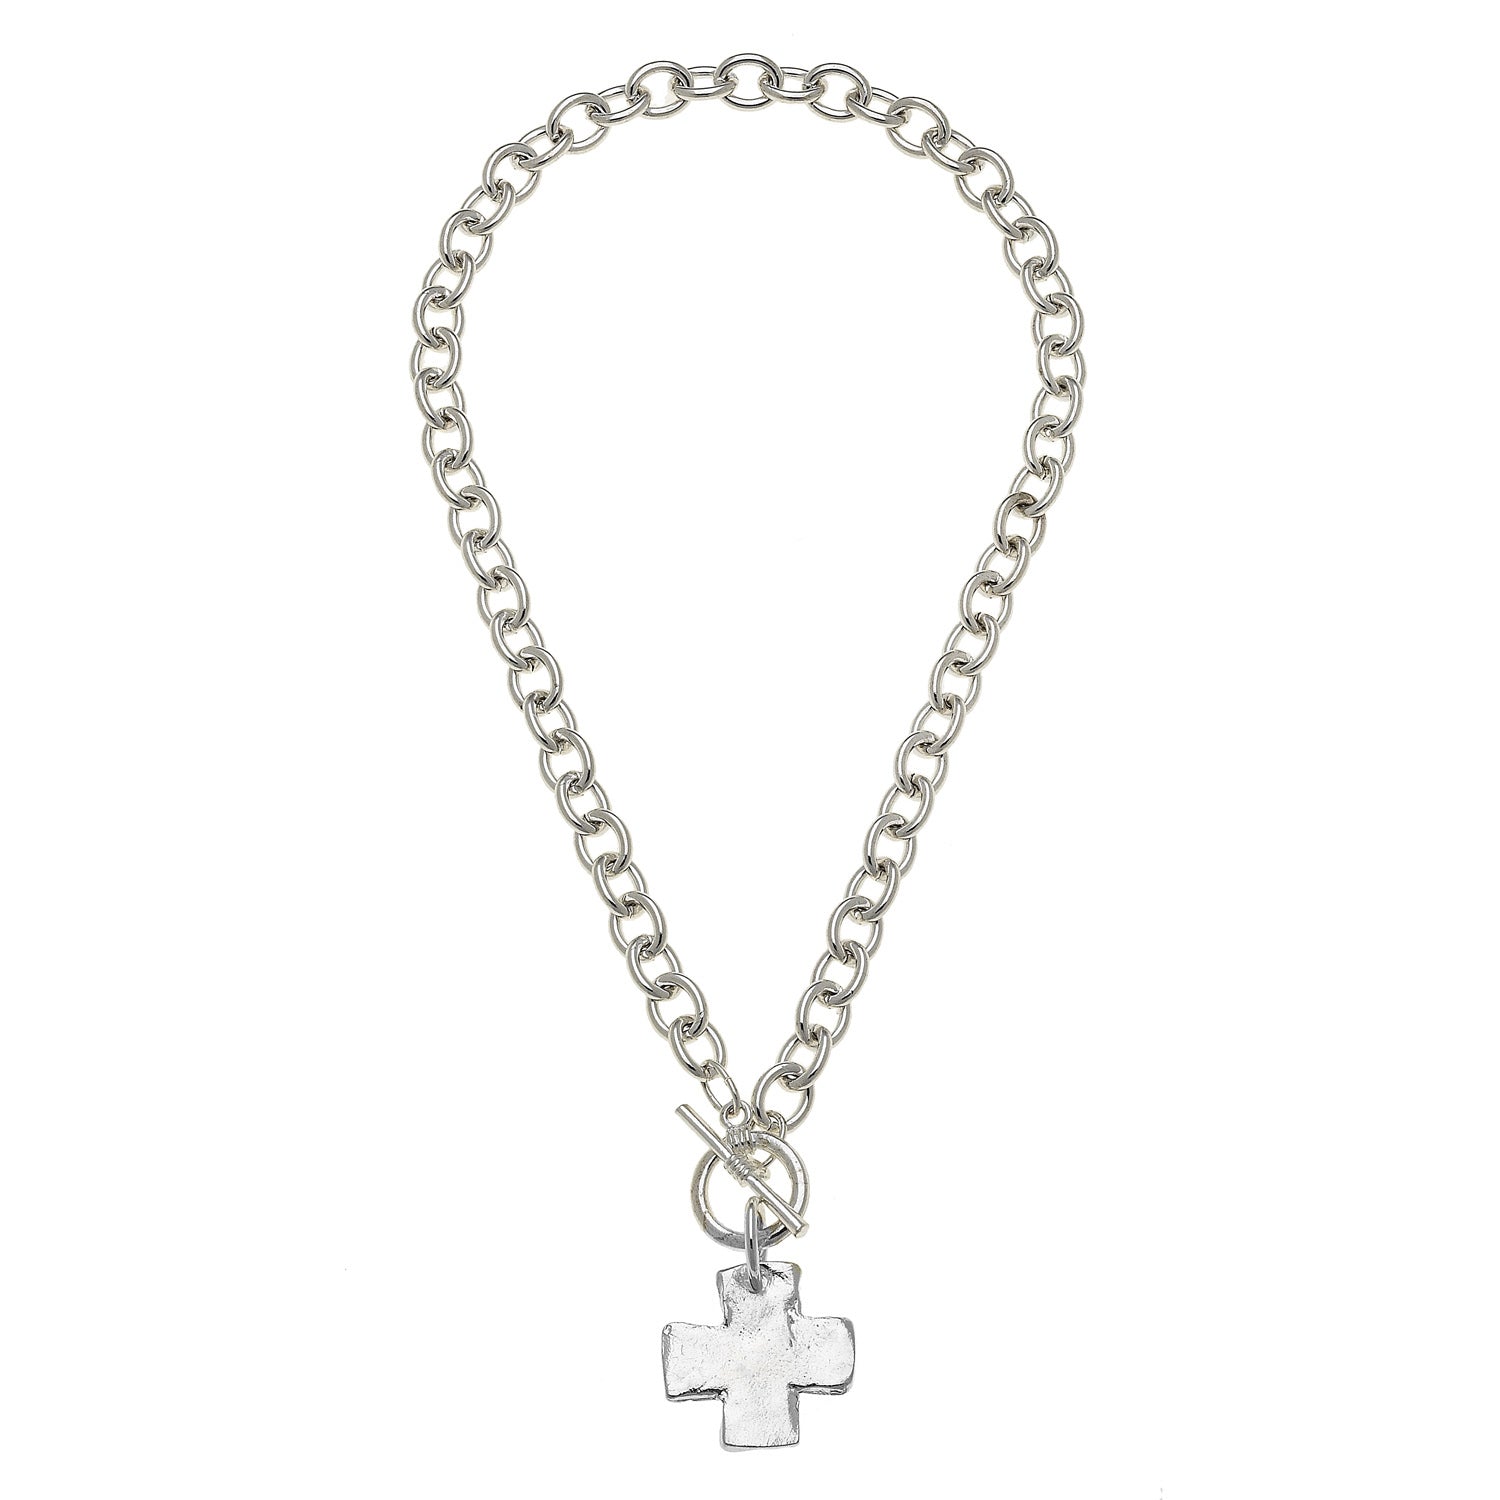 Susan Shaw Silver Cross Toggle Necklace, 18"